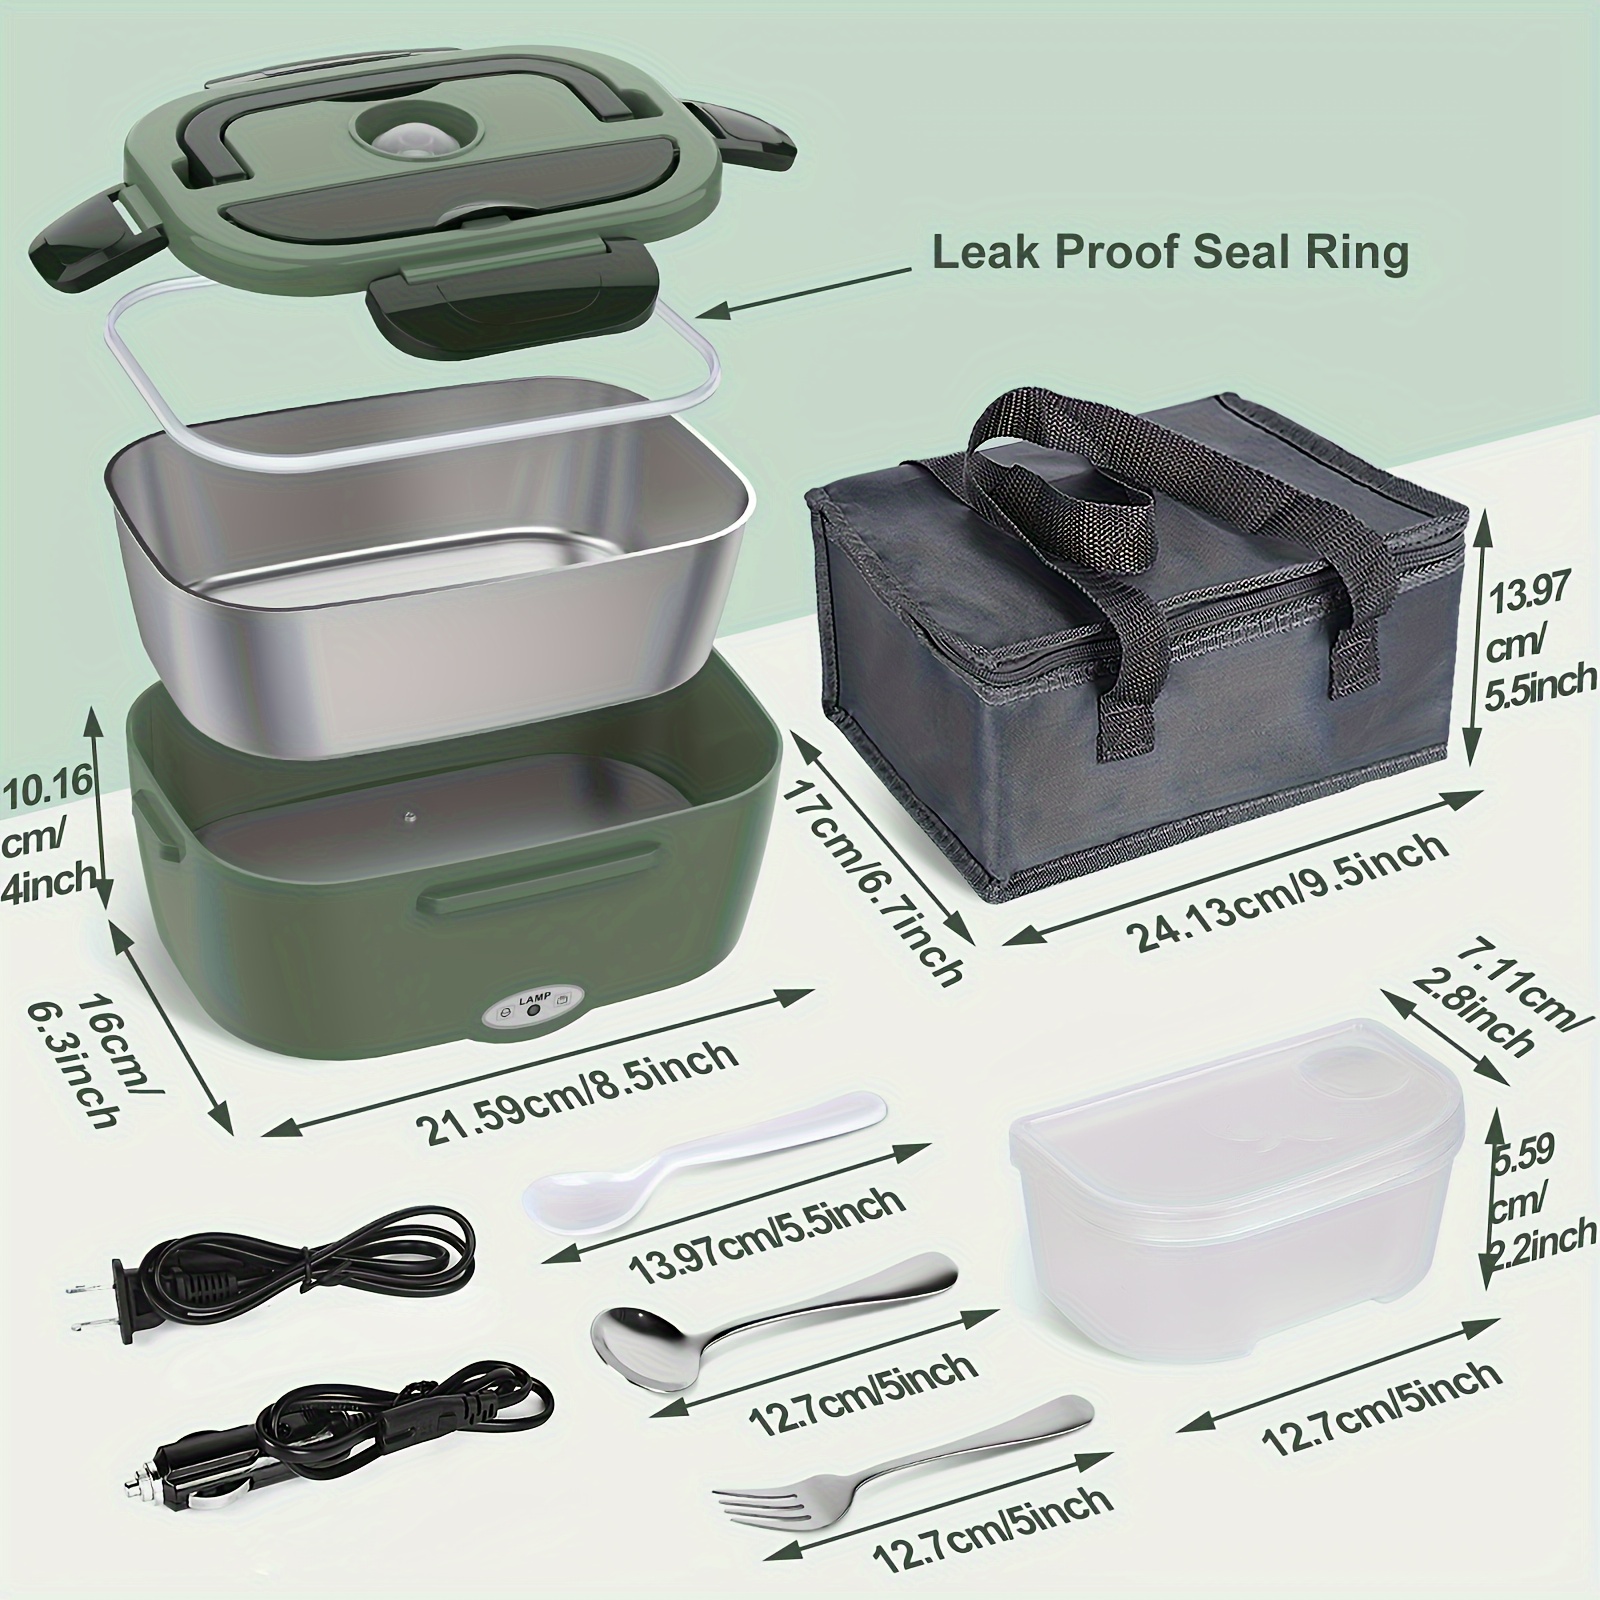 Electric Lunch Box 1 Ultra Quick Portable Food - Temu